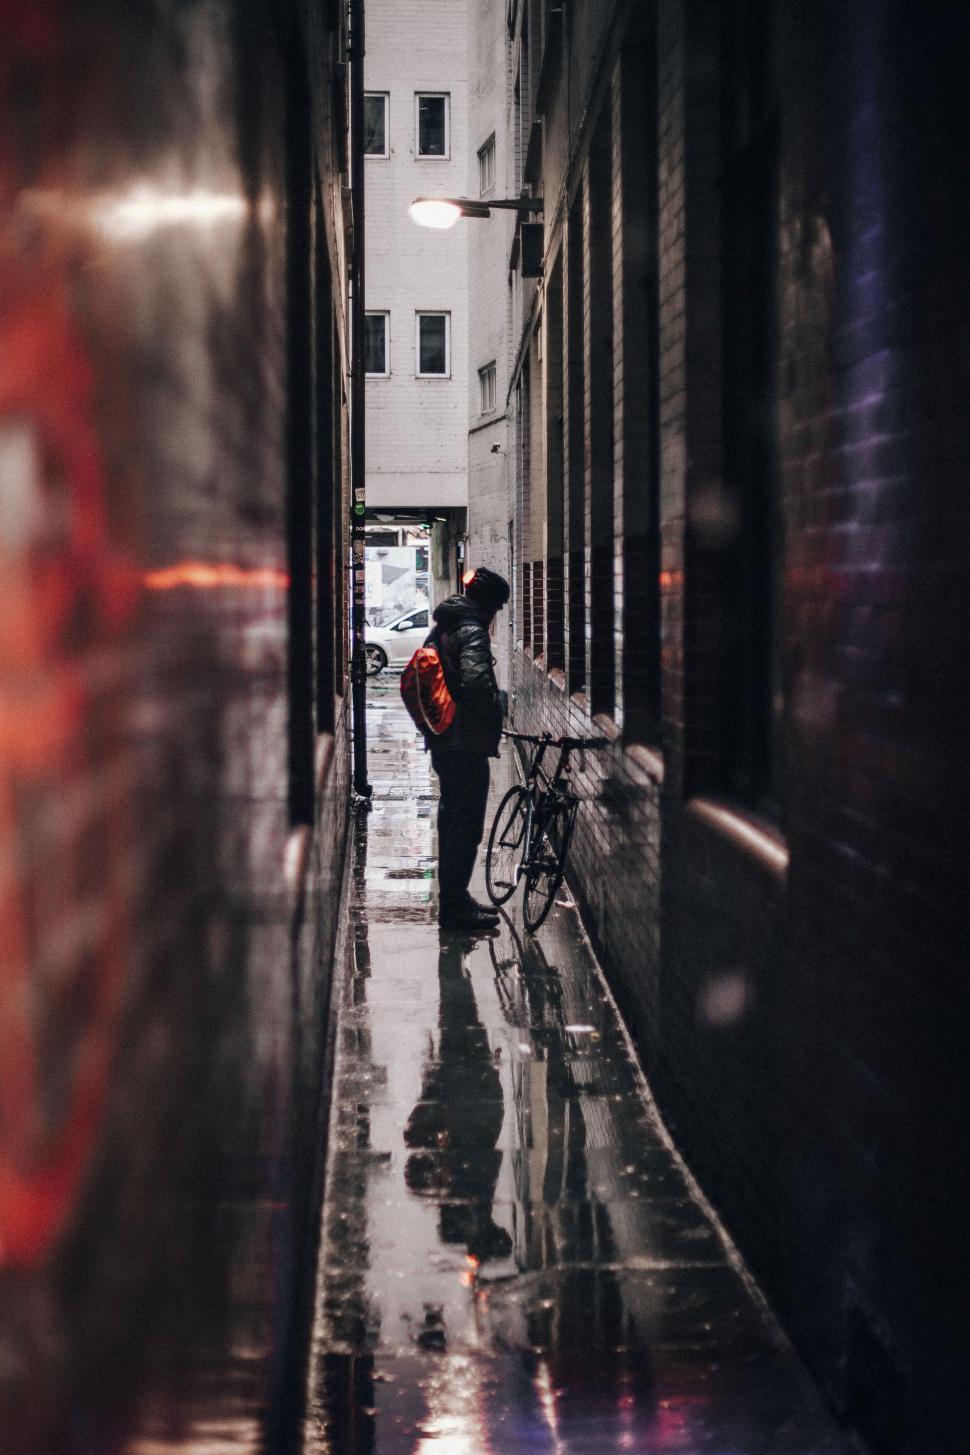 Free Image of Lonely figure in rainy alley 